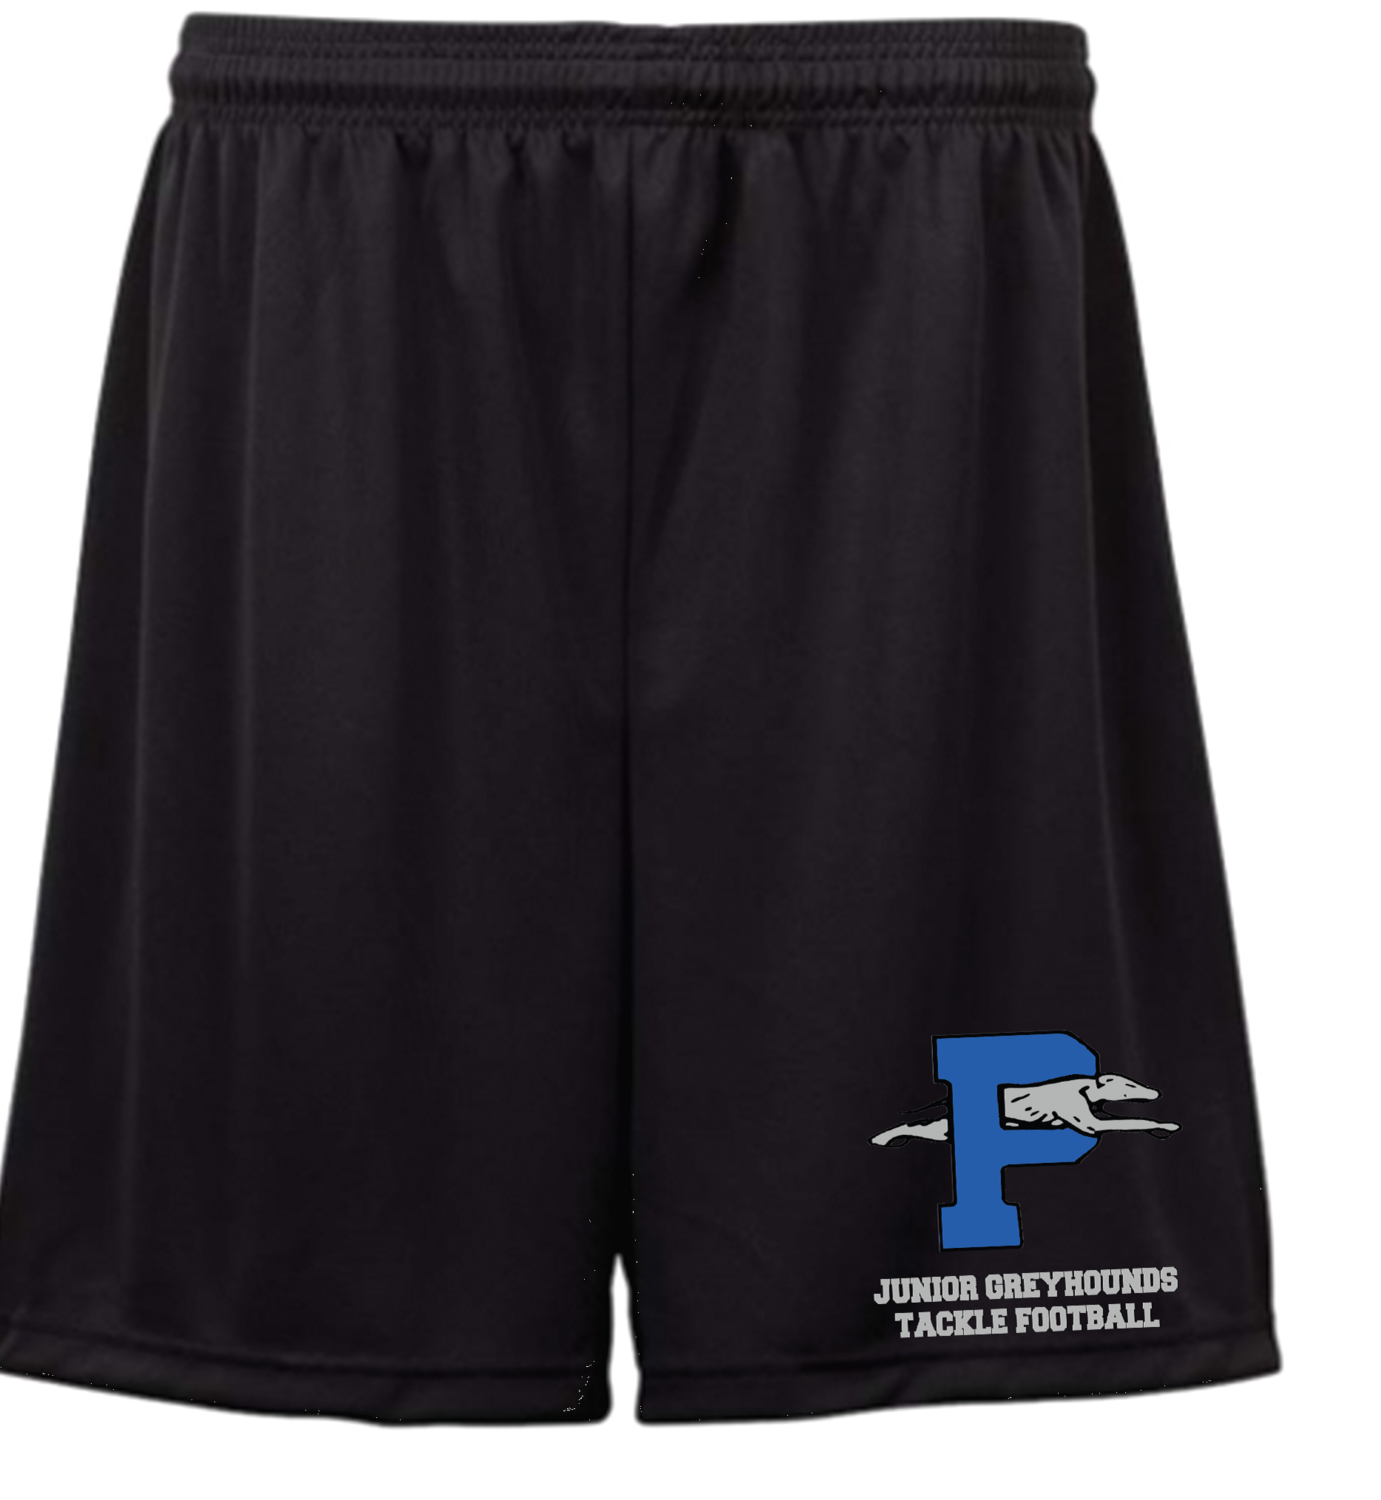 Men's Dri-Fit Shorts, available in Blue or Black